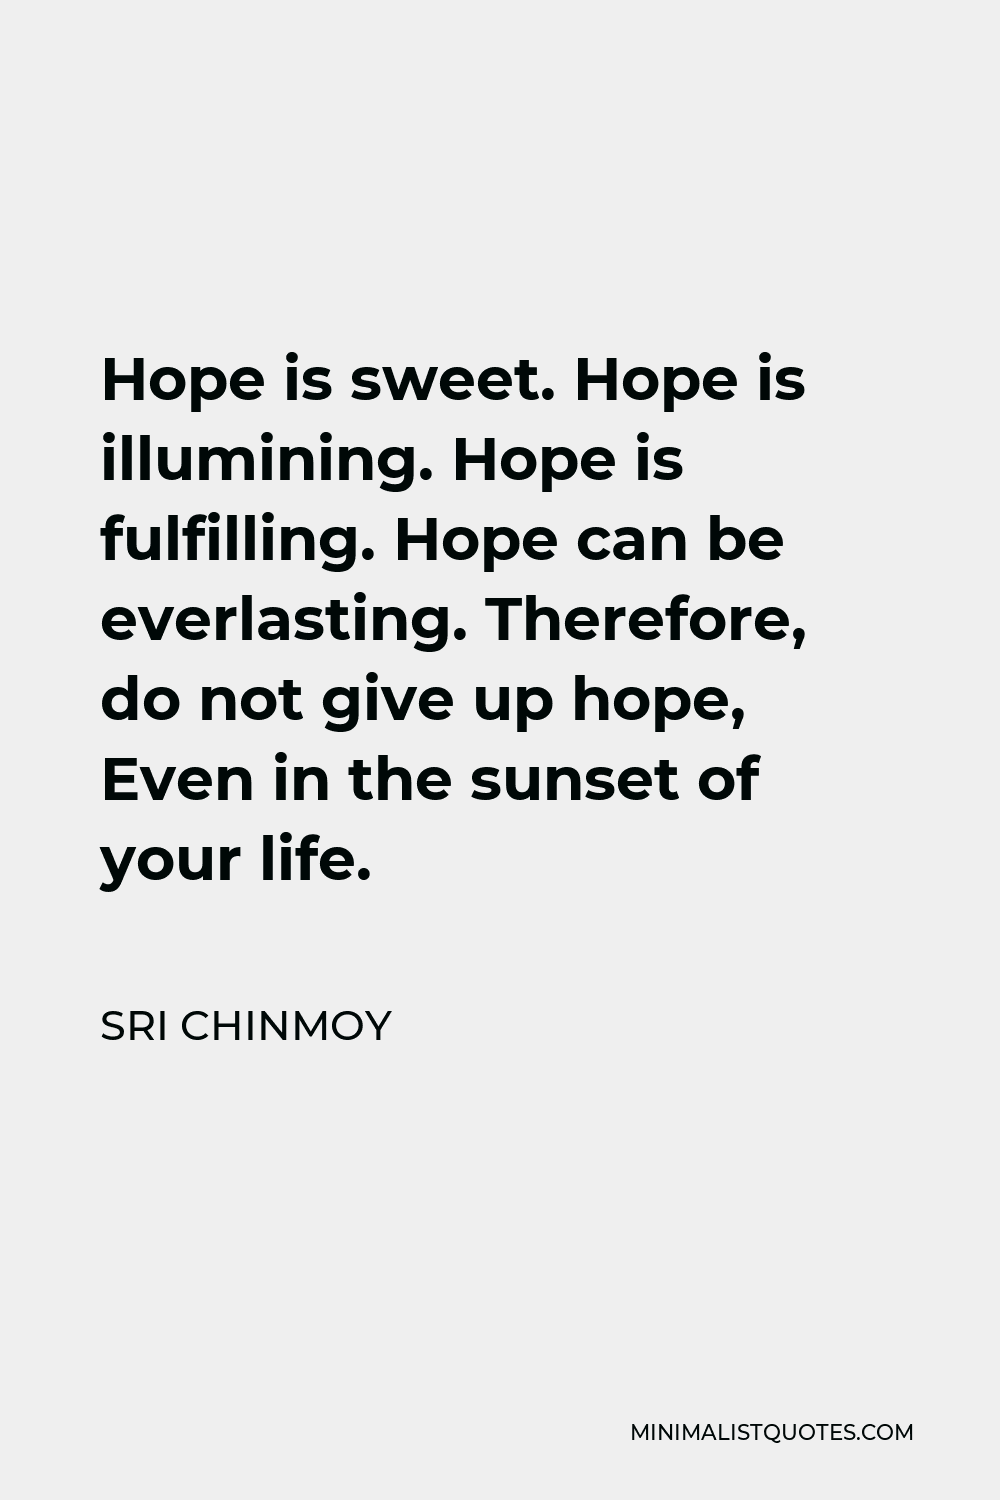 Sri Chinmoy Quote - Hope is sweet. Hope is illumining. Hope is fulfilling. Hope can be everlasting. Therefore, do not give up hope, Even in the sunset of your life.